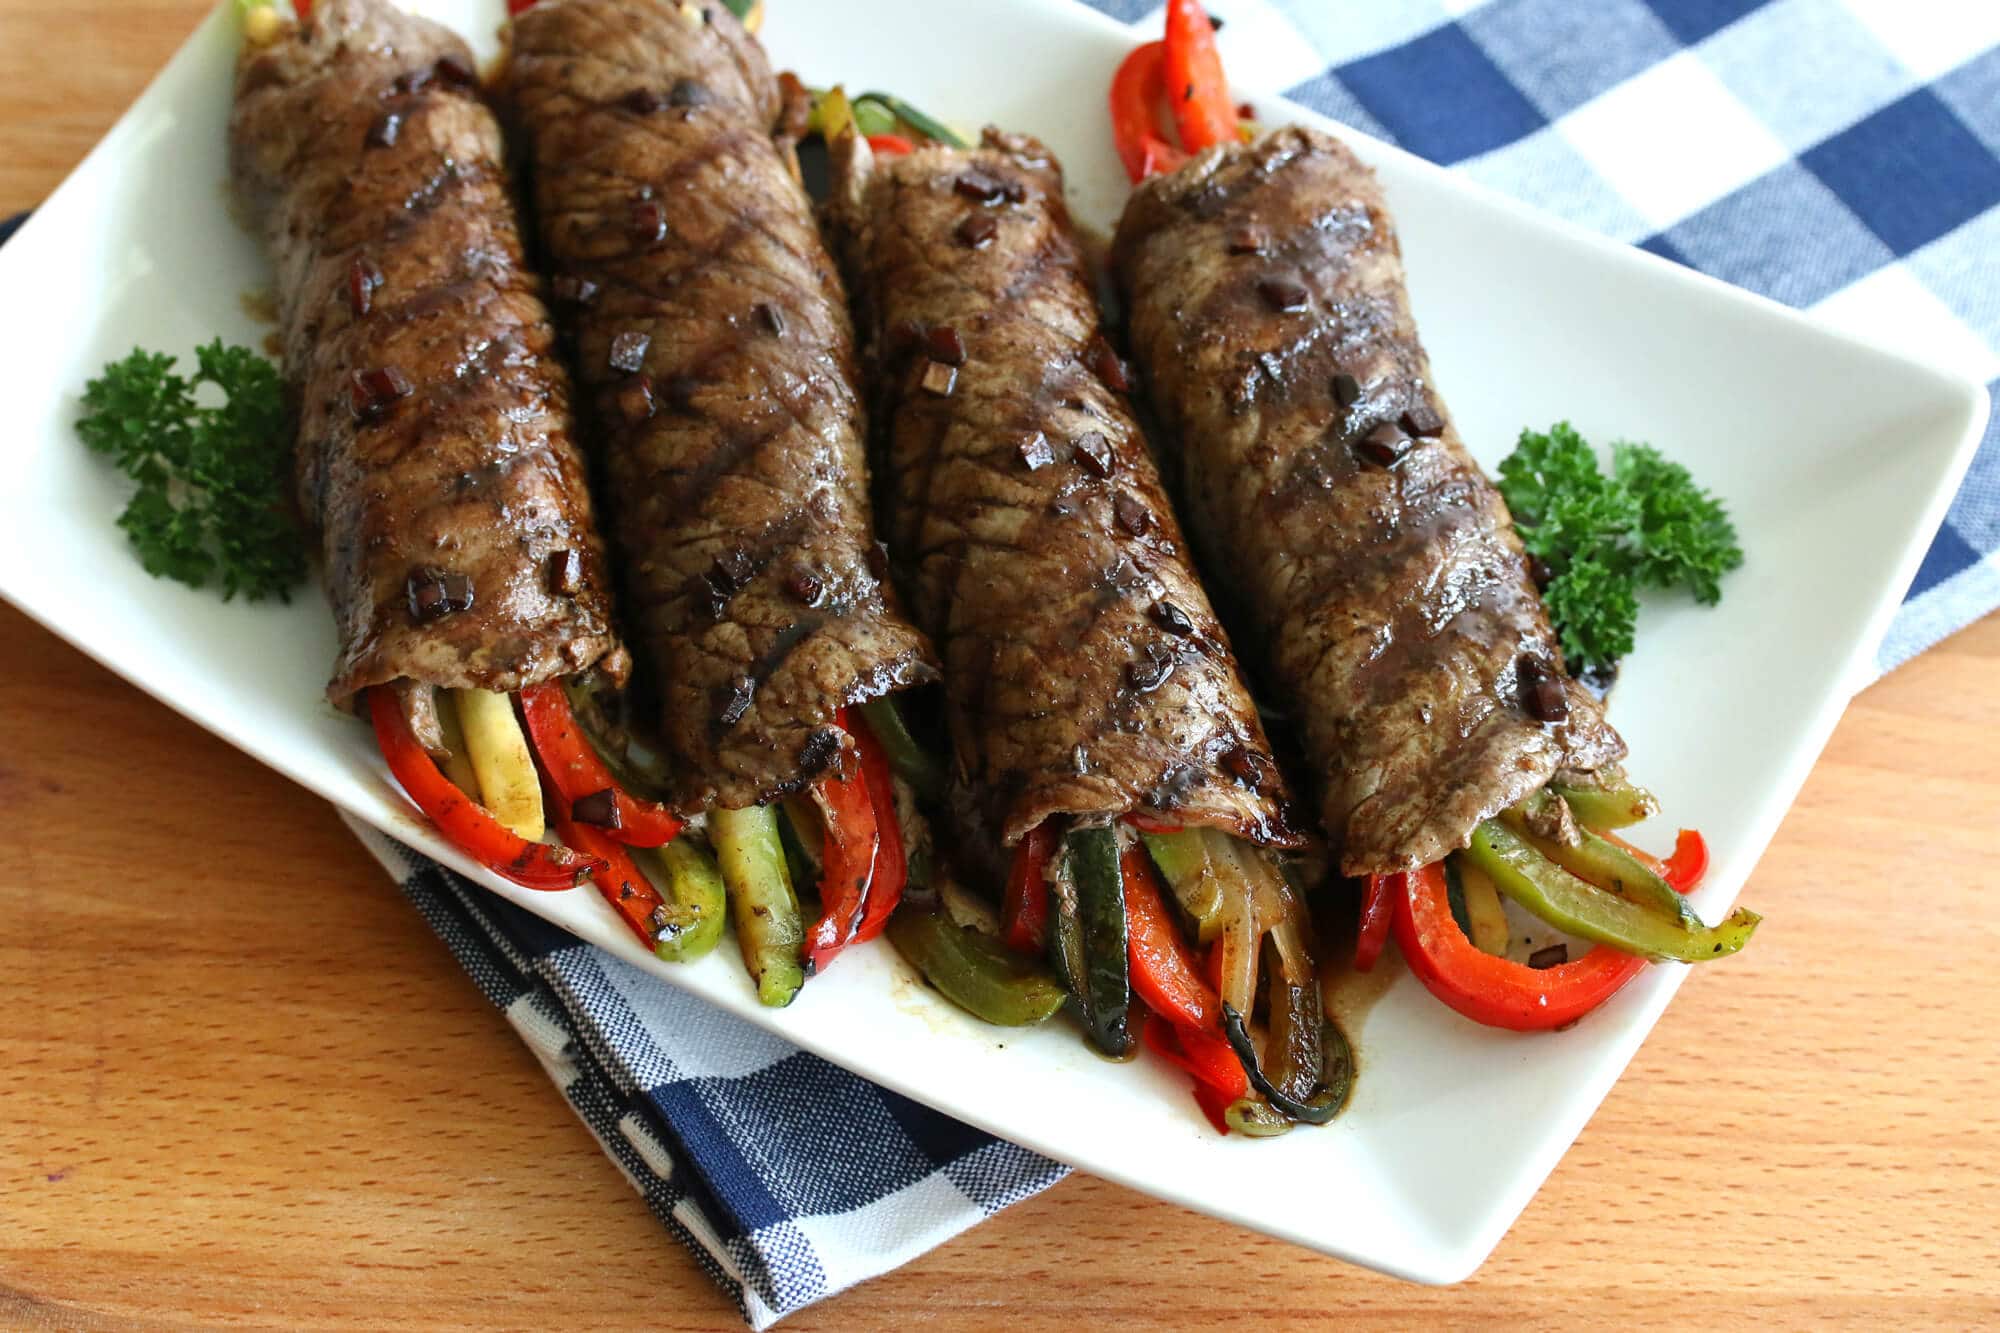 rosemary balsamic glazed steak rolls recipe vegetables healthy low carb low calorie bell peppers zucchini mushrooms